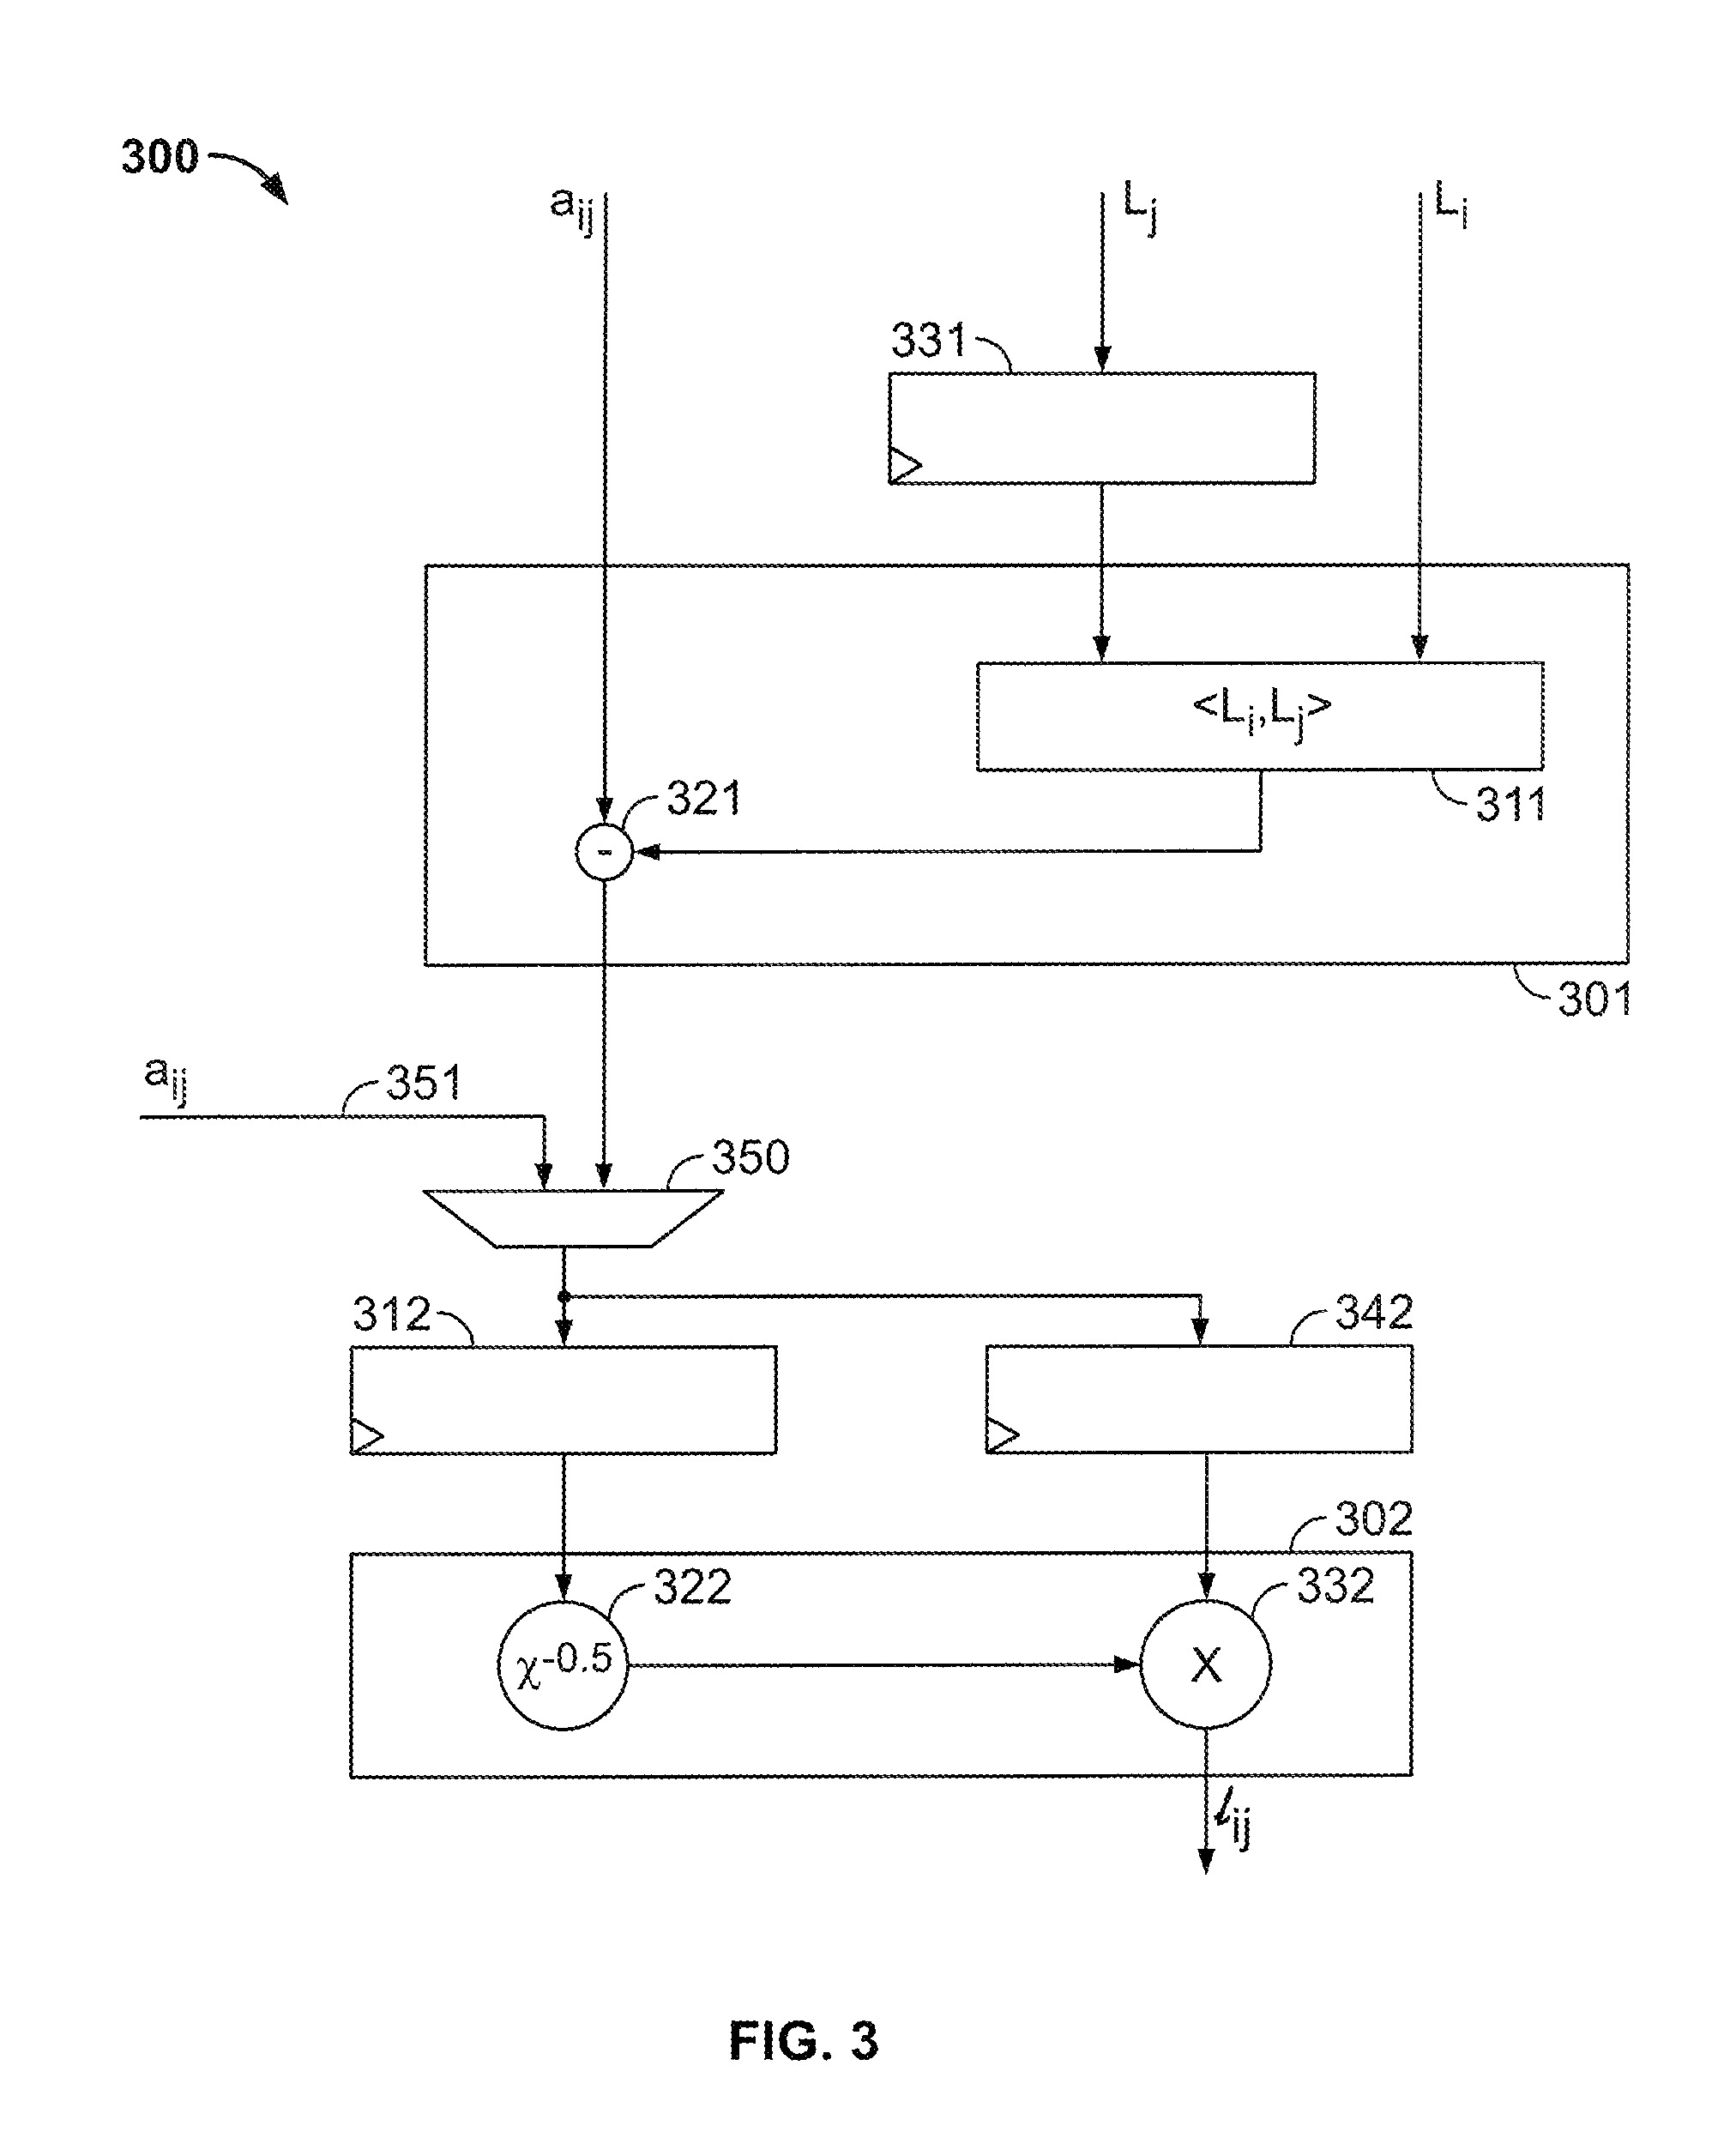 Matrix operations in an integrated circuit device